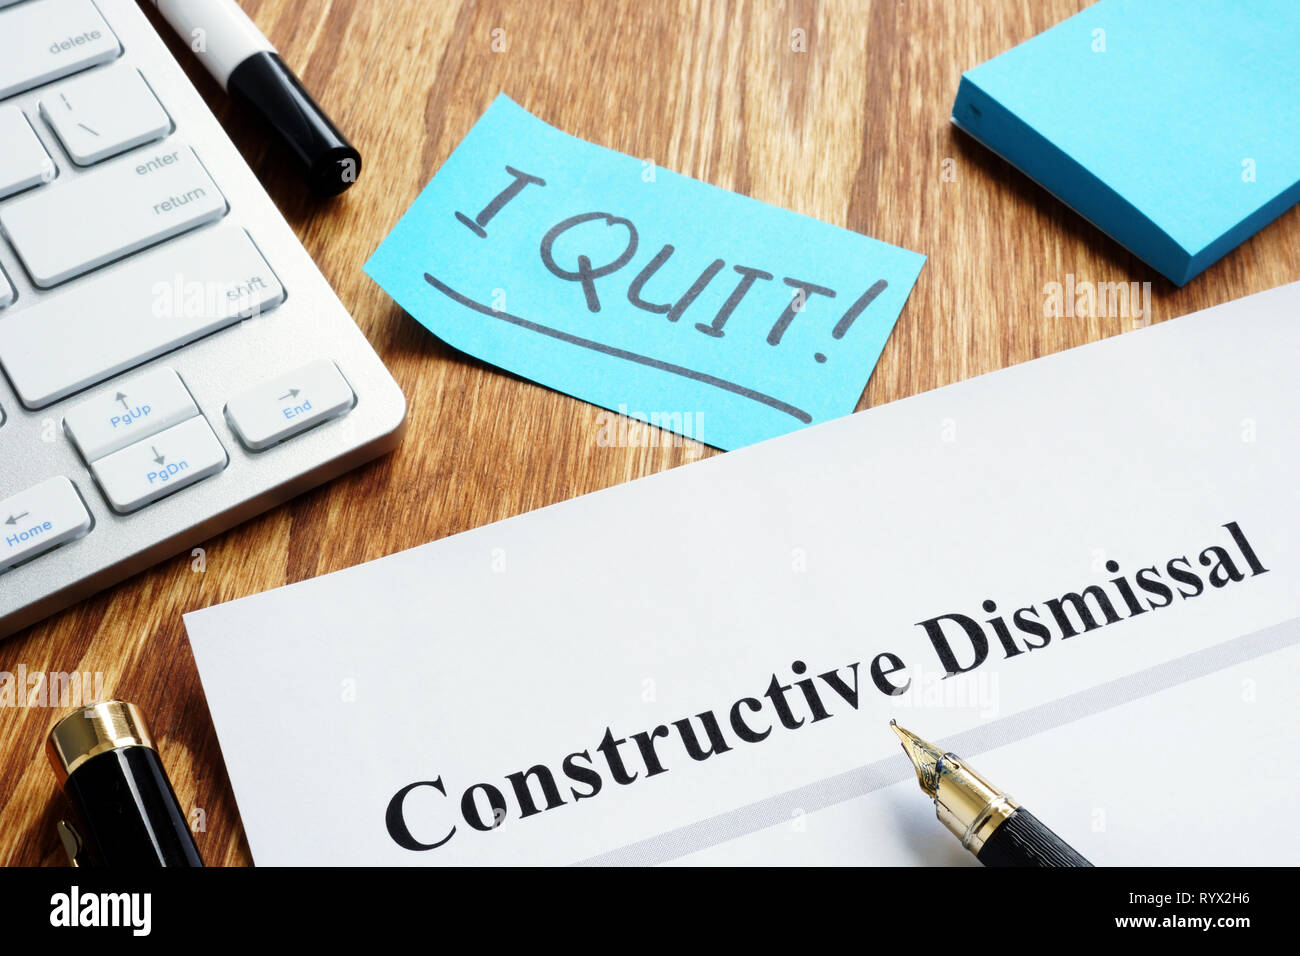 Constructive dismissal papers on the workplace. Stock Photo